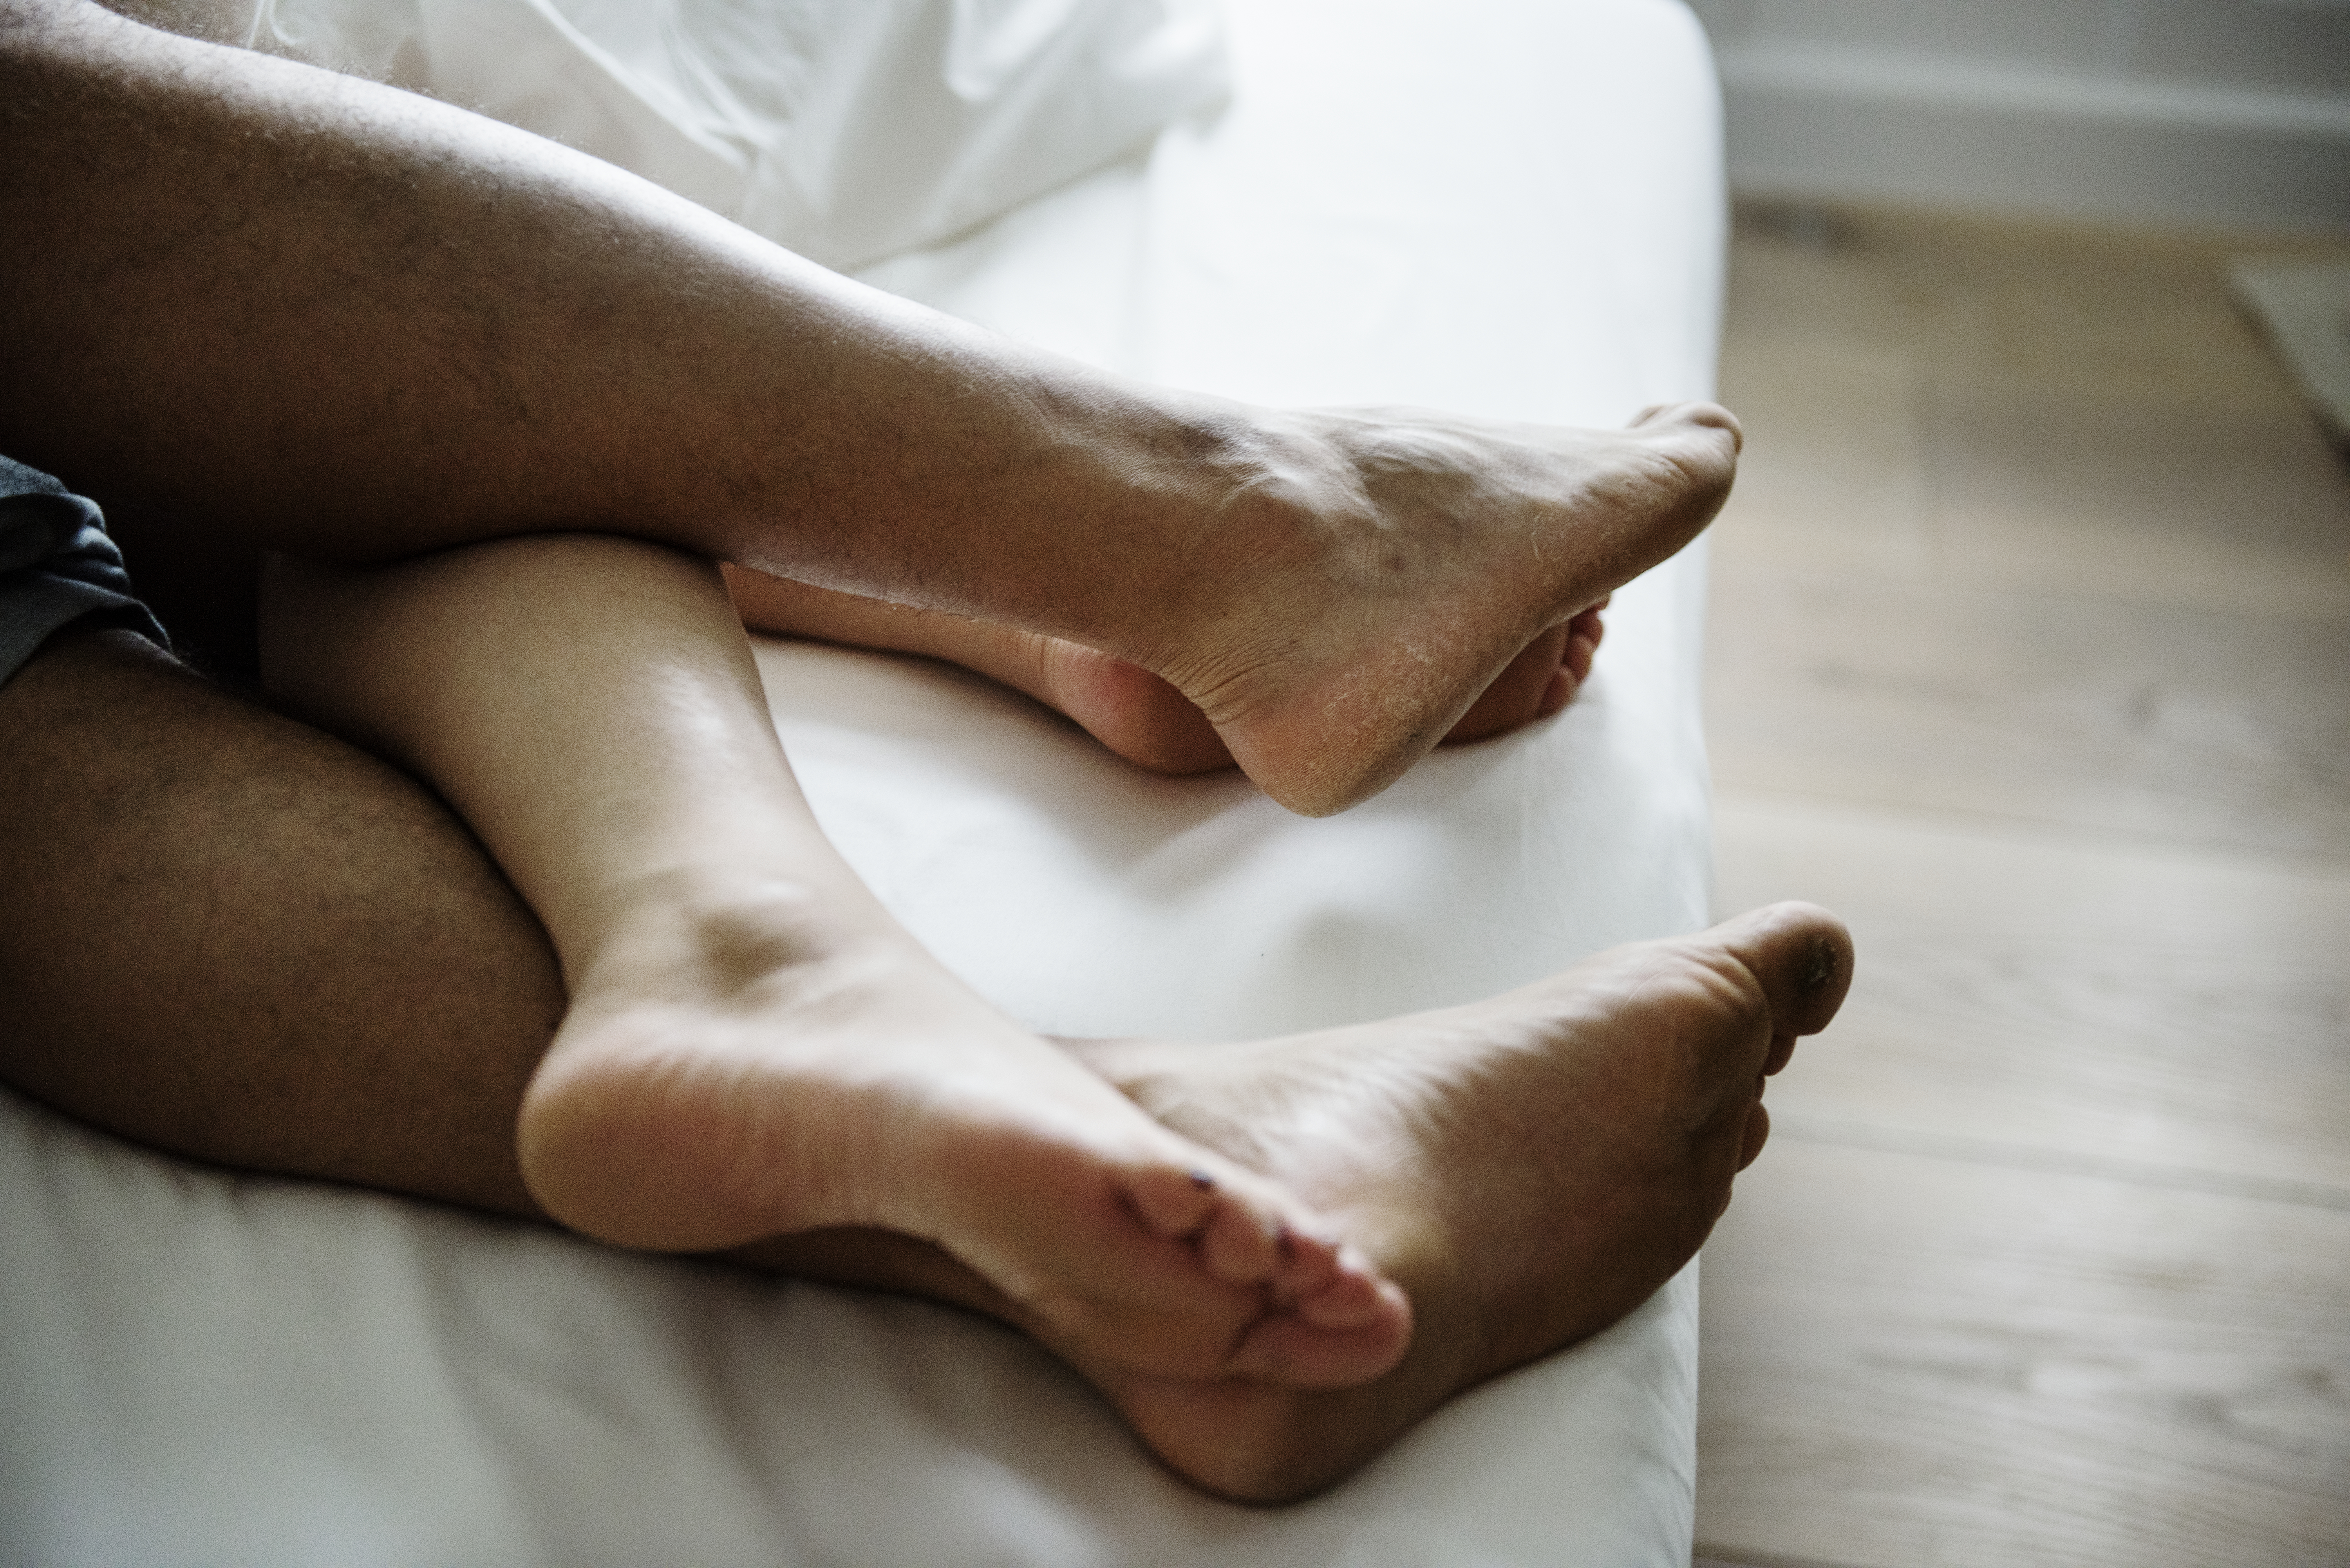 The importance of aftercare after sex